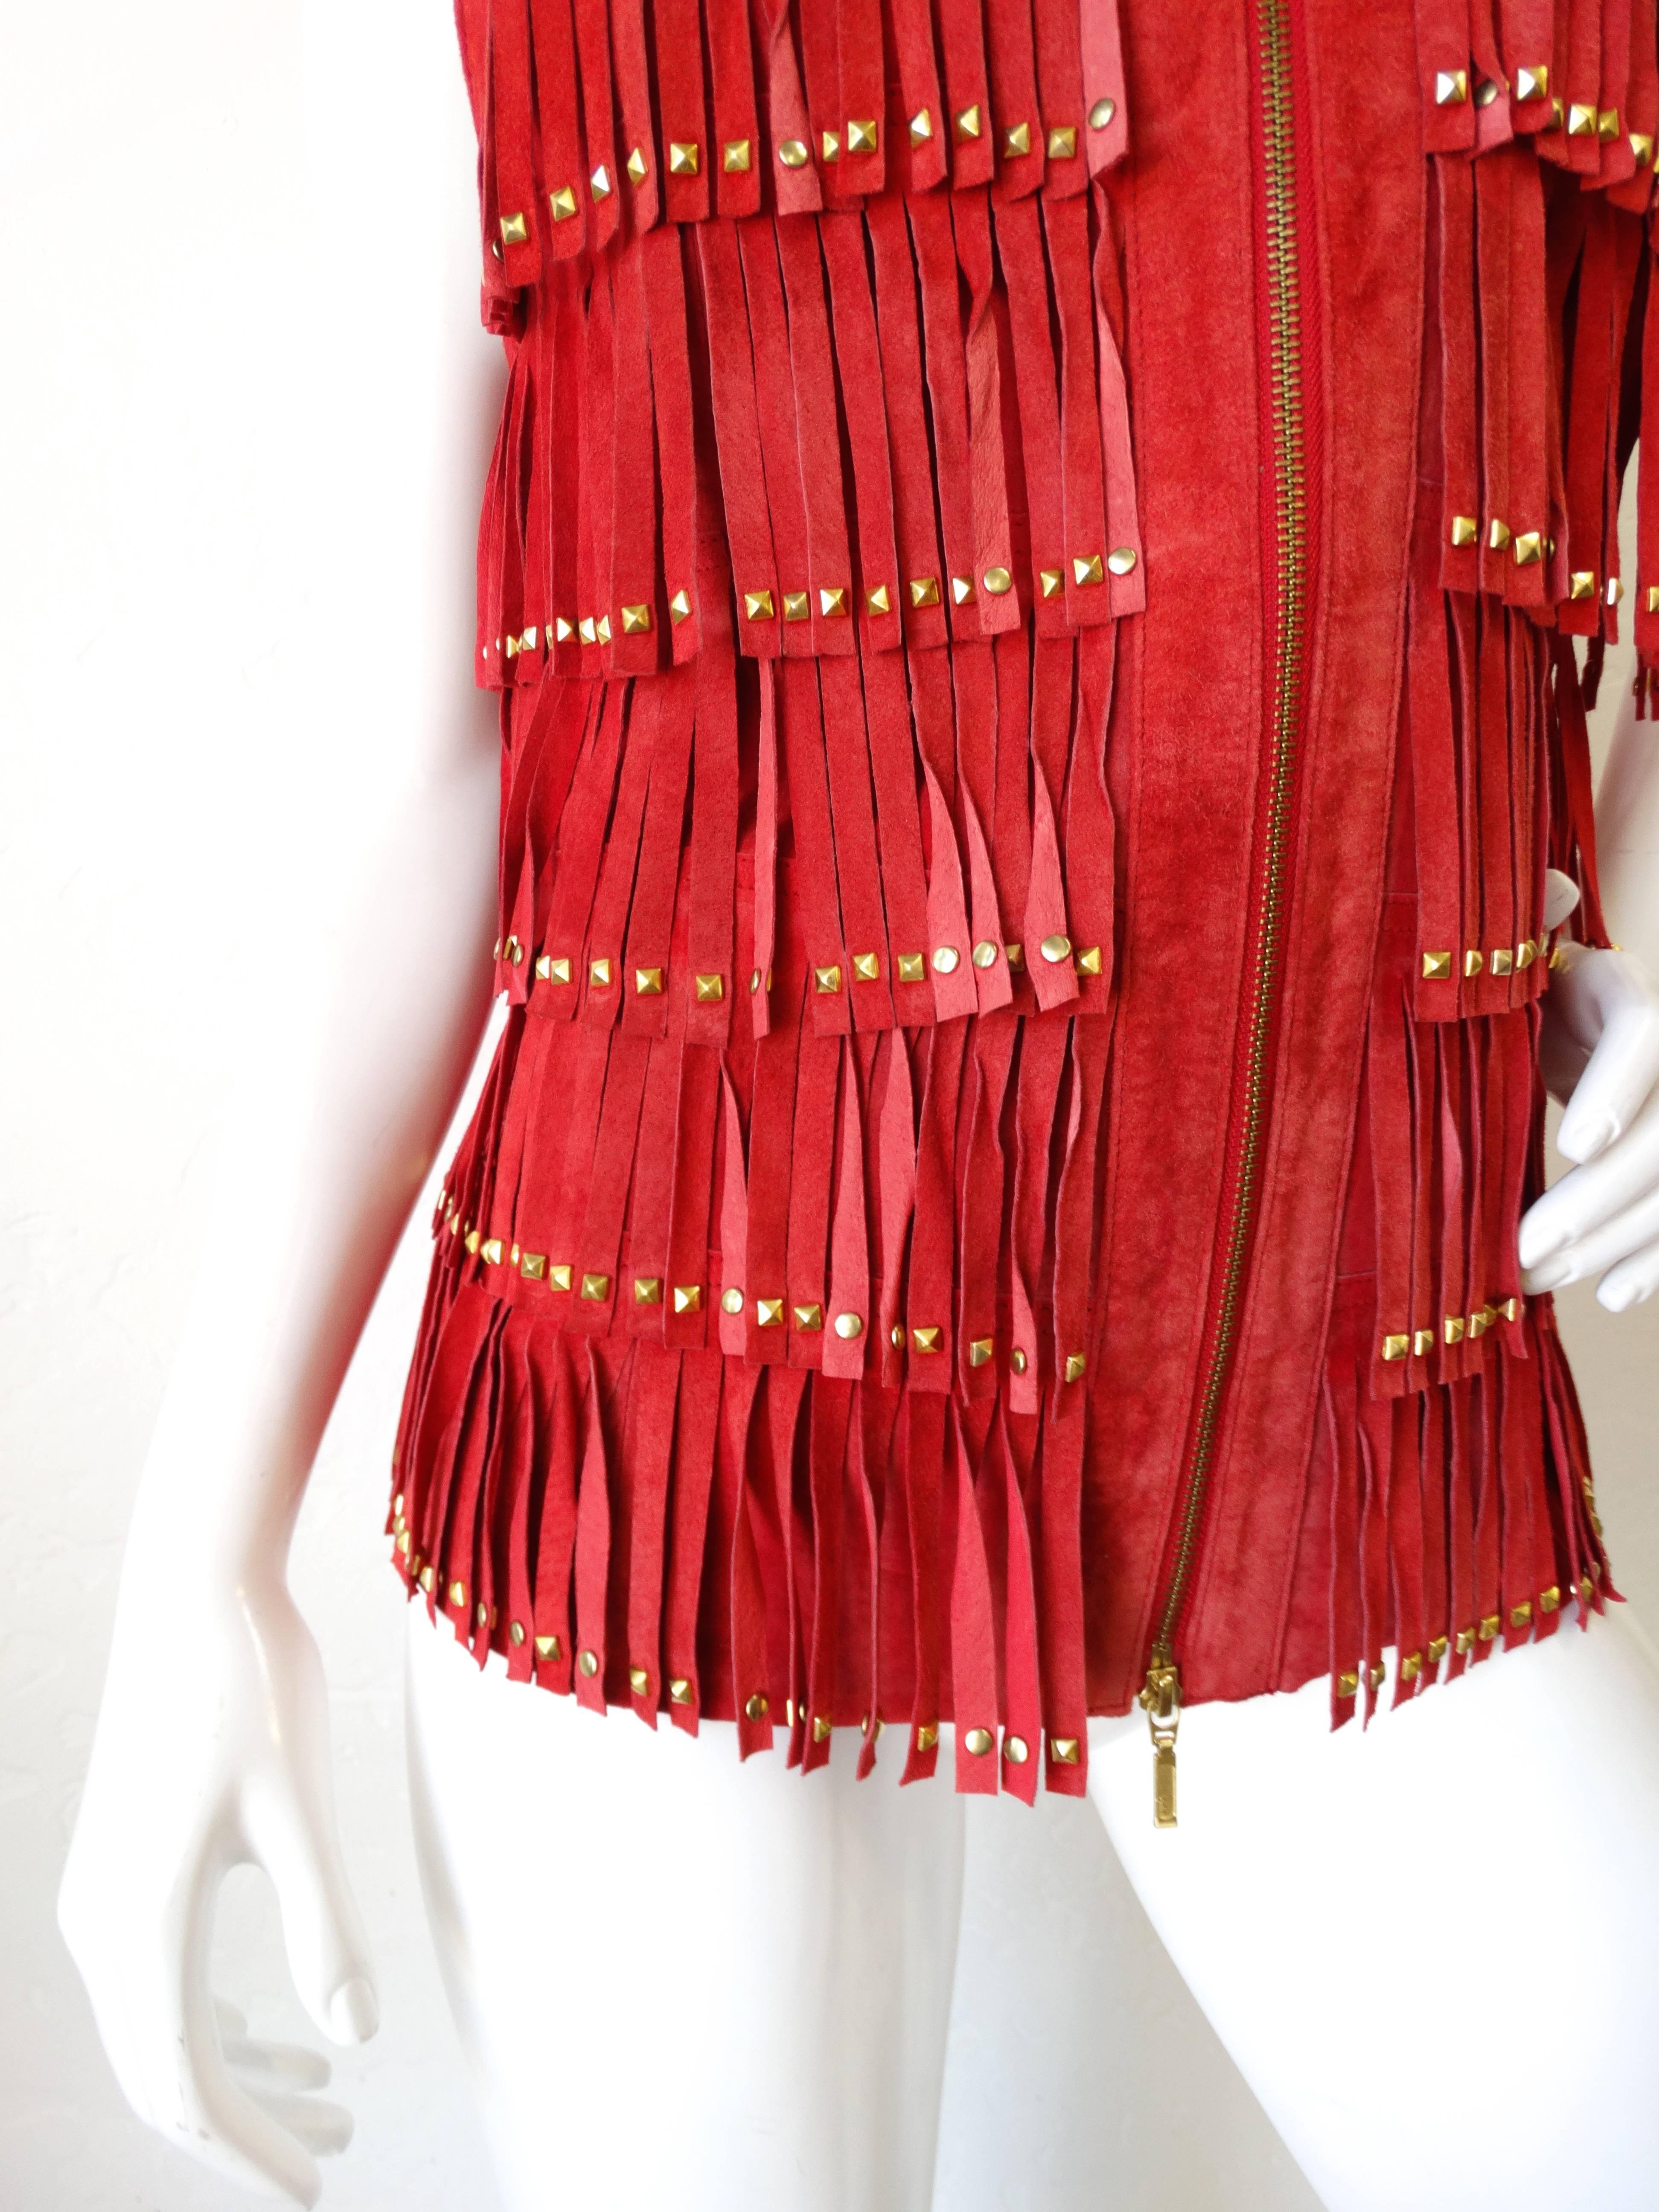 Get ready for festival season with our adorable red suede fringe vest! Made of a super soft suede in a bright lipstick red color. Fringe all down the front of the body, accented with flat head studs at the end of each piece. Zips up the front of the